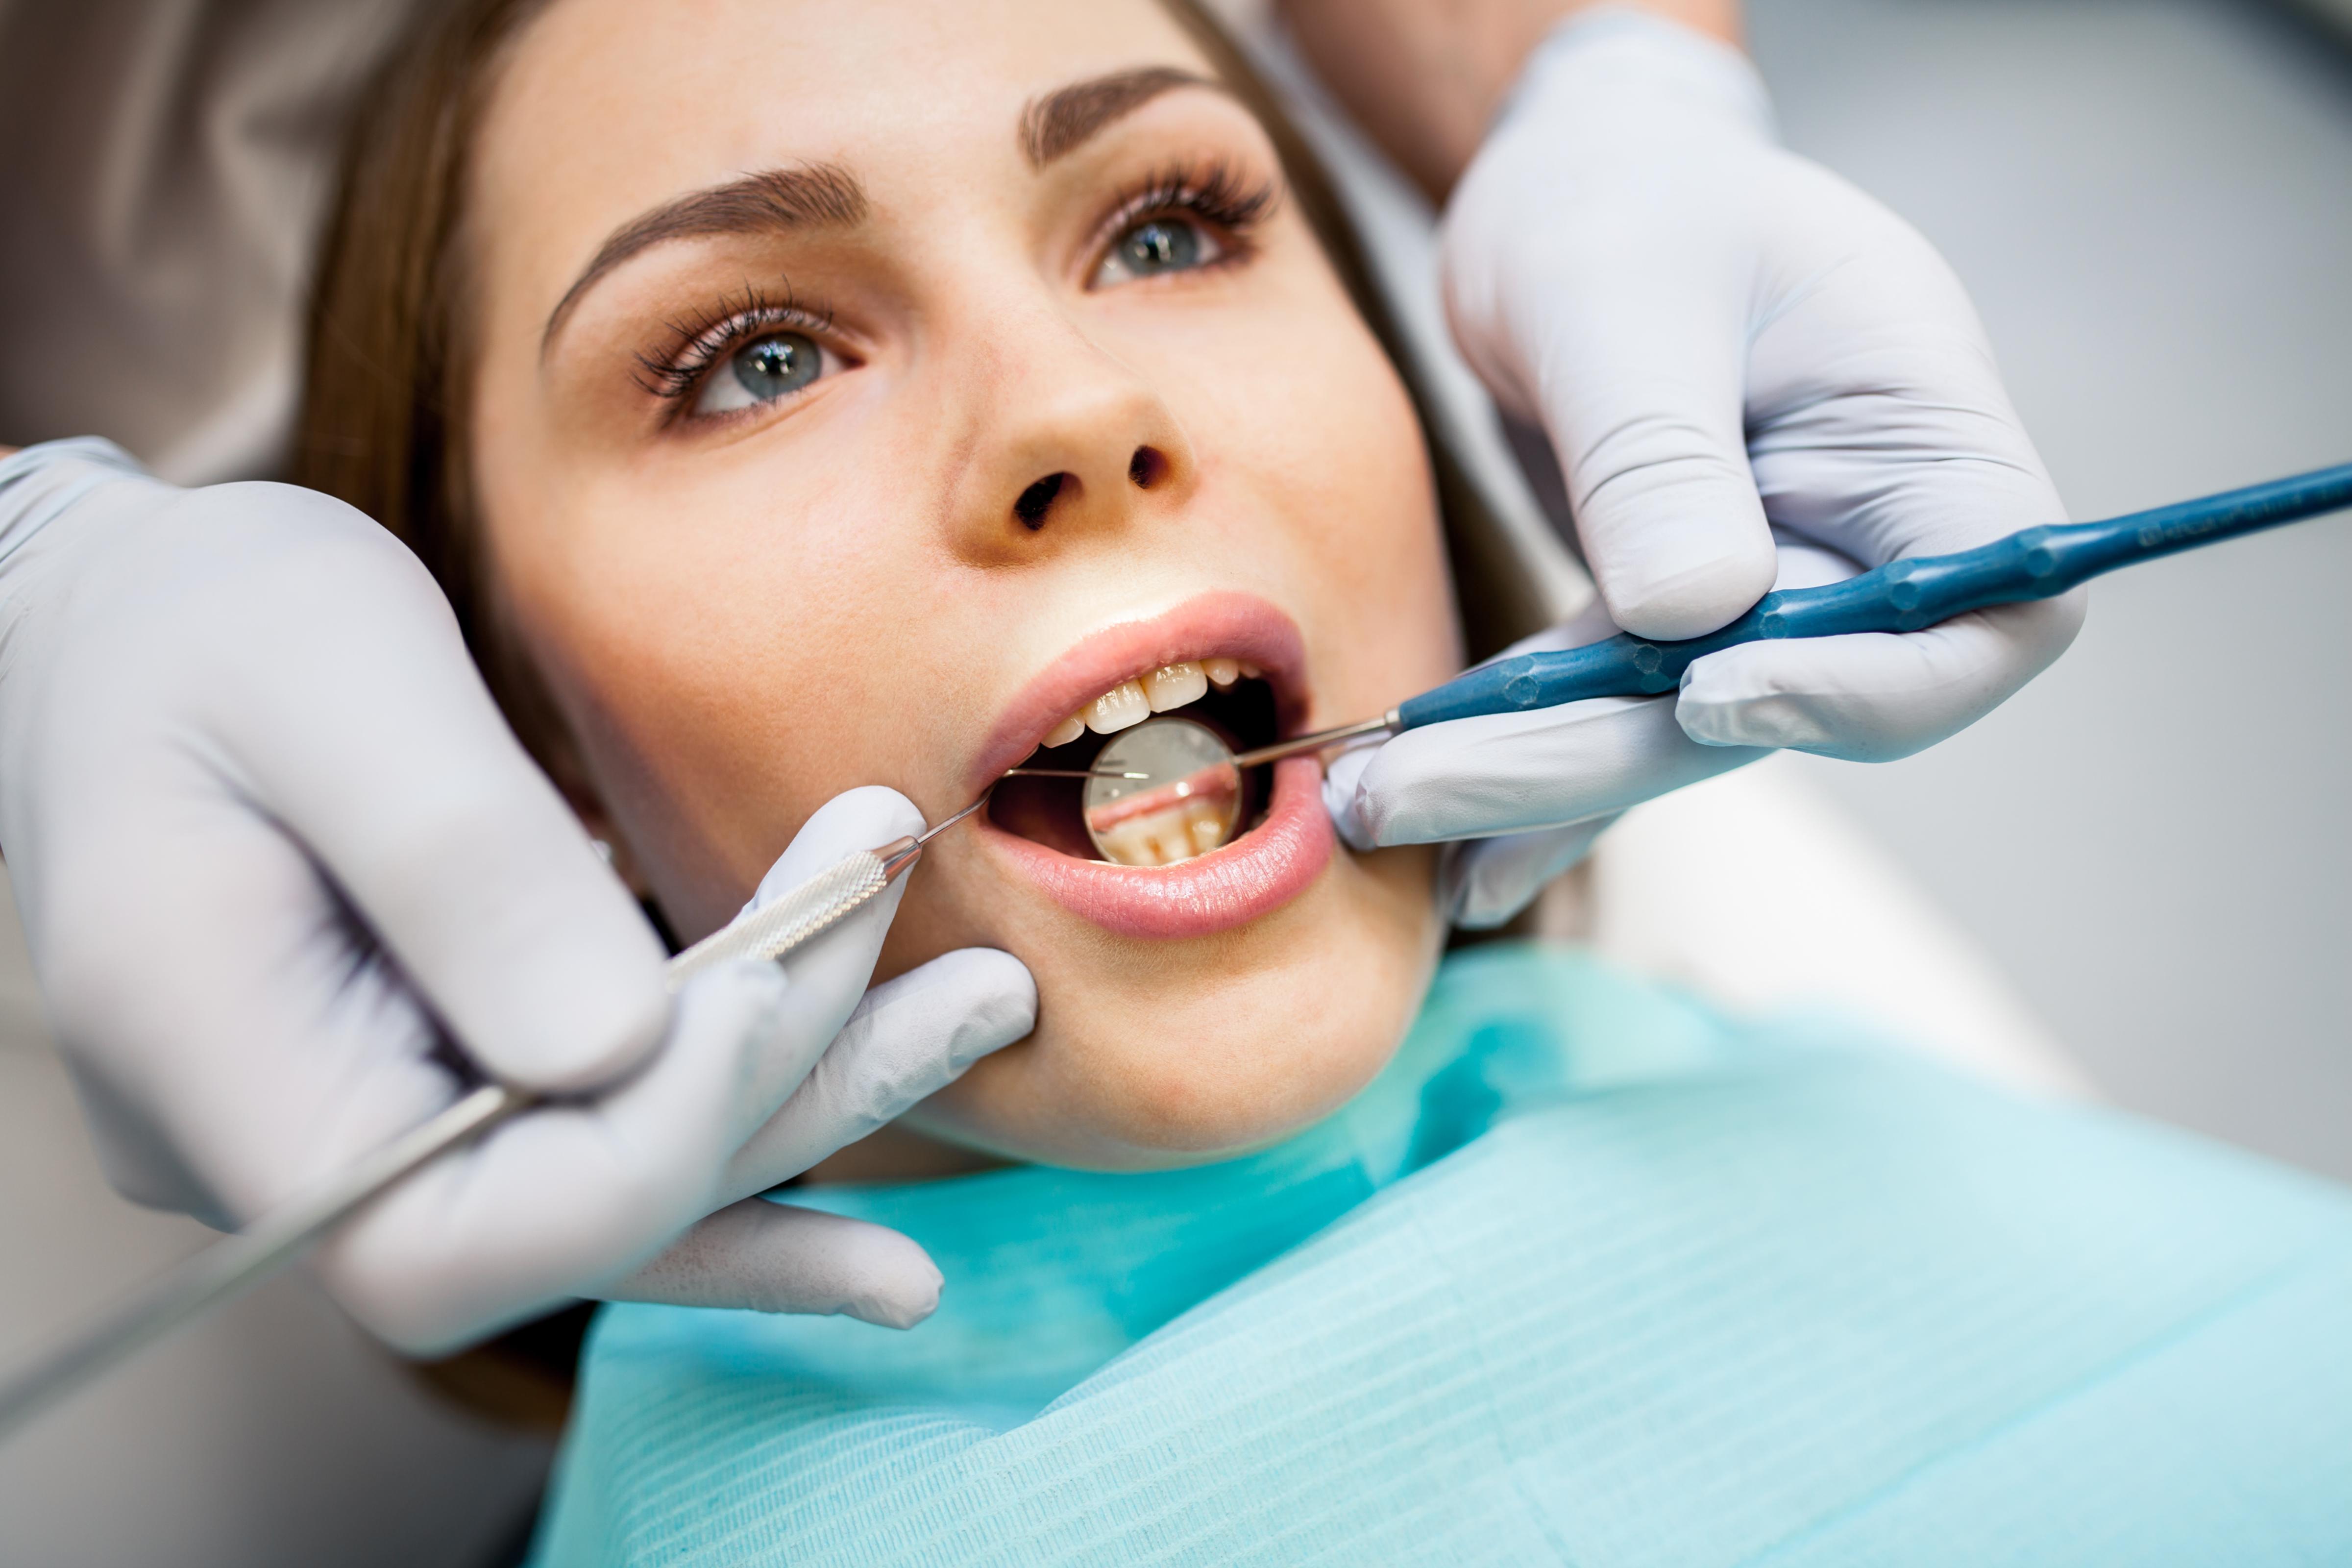 Dental Care woman with mouth open